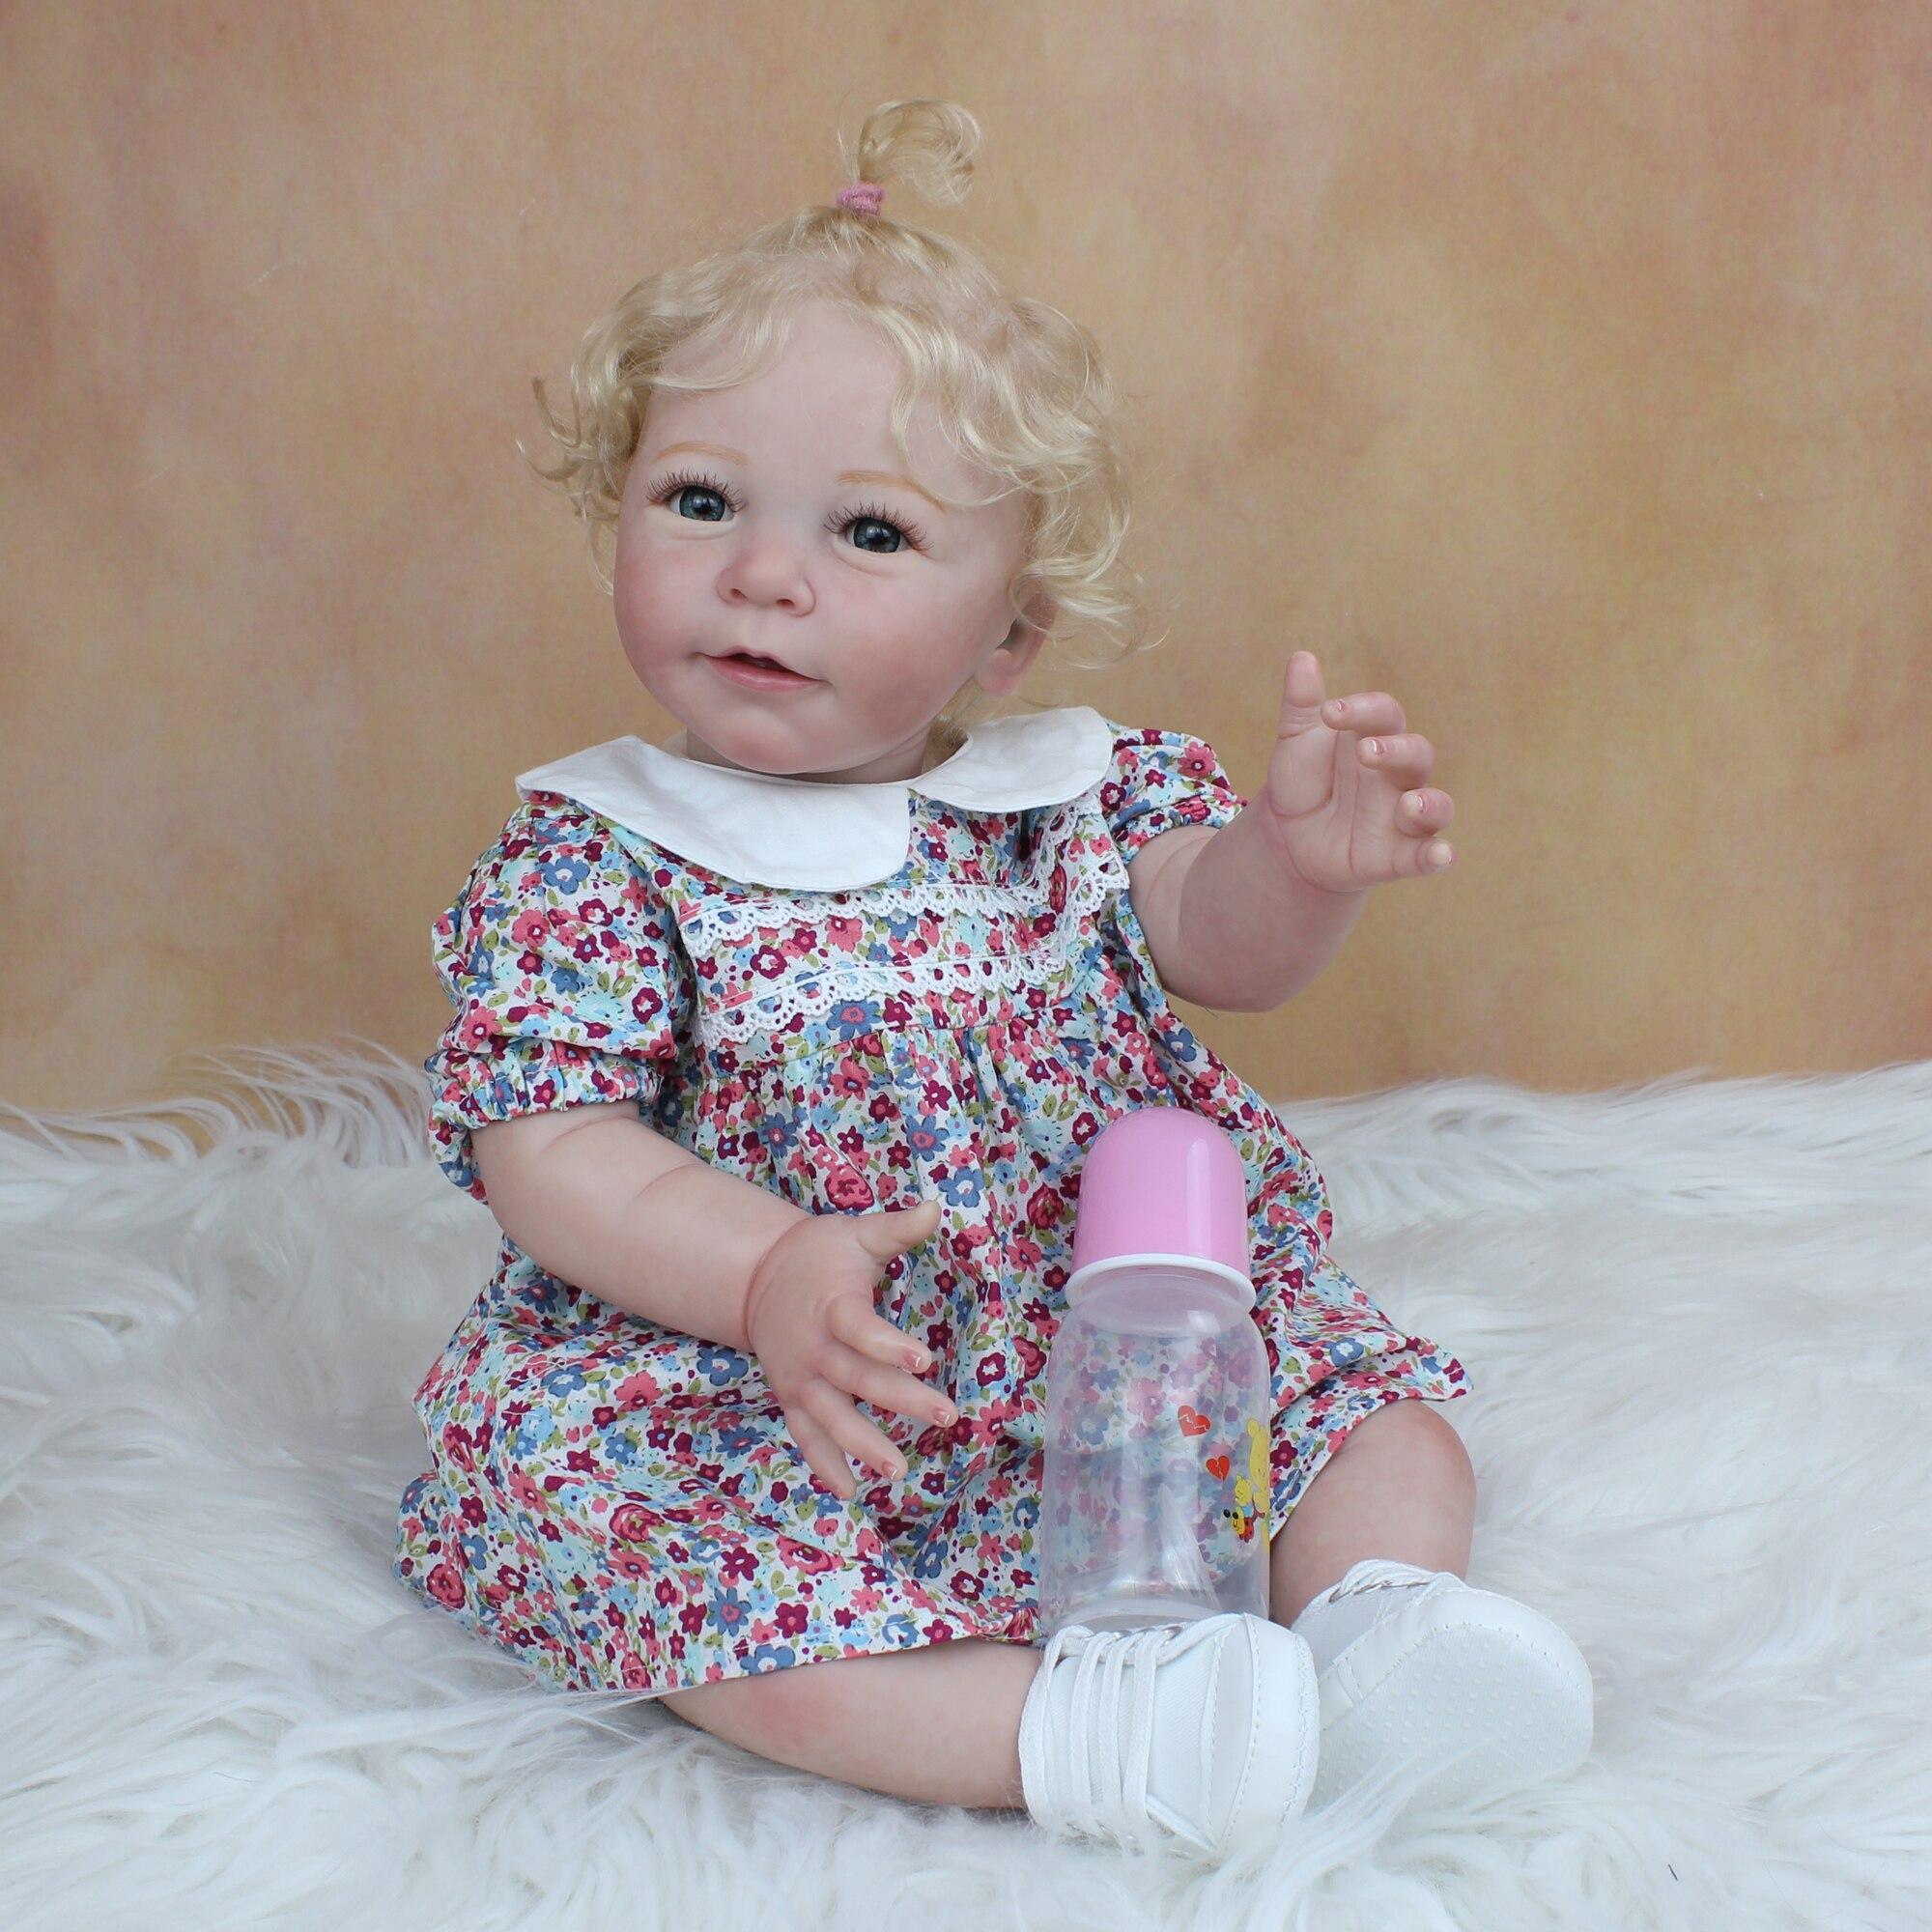 BZDOLL Reborn BZDOLL 55CM 3D-Paint Skin Soft Silicone Reborn Baby Doll Have Blood Vessels and Bloodshot 22 Inch Cloth Body Blonde Lisa Girl Toy